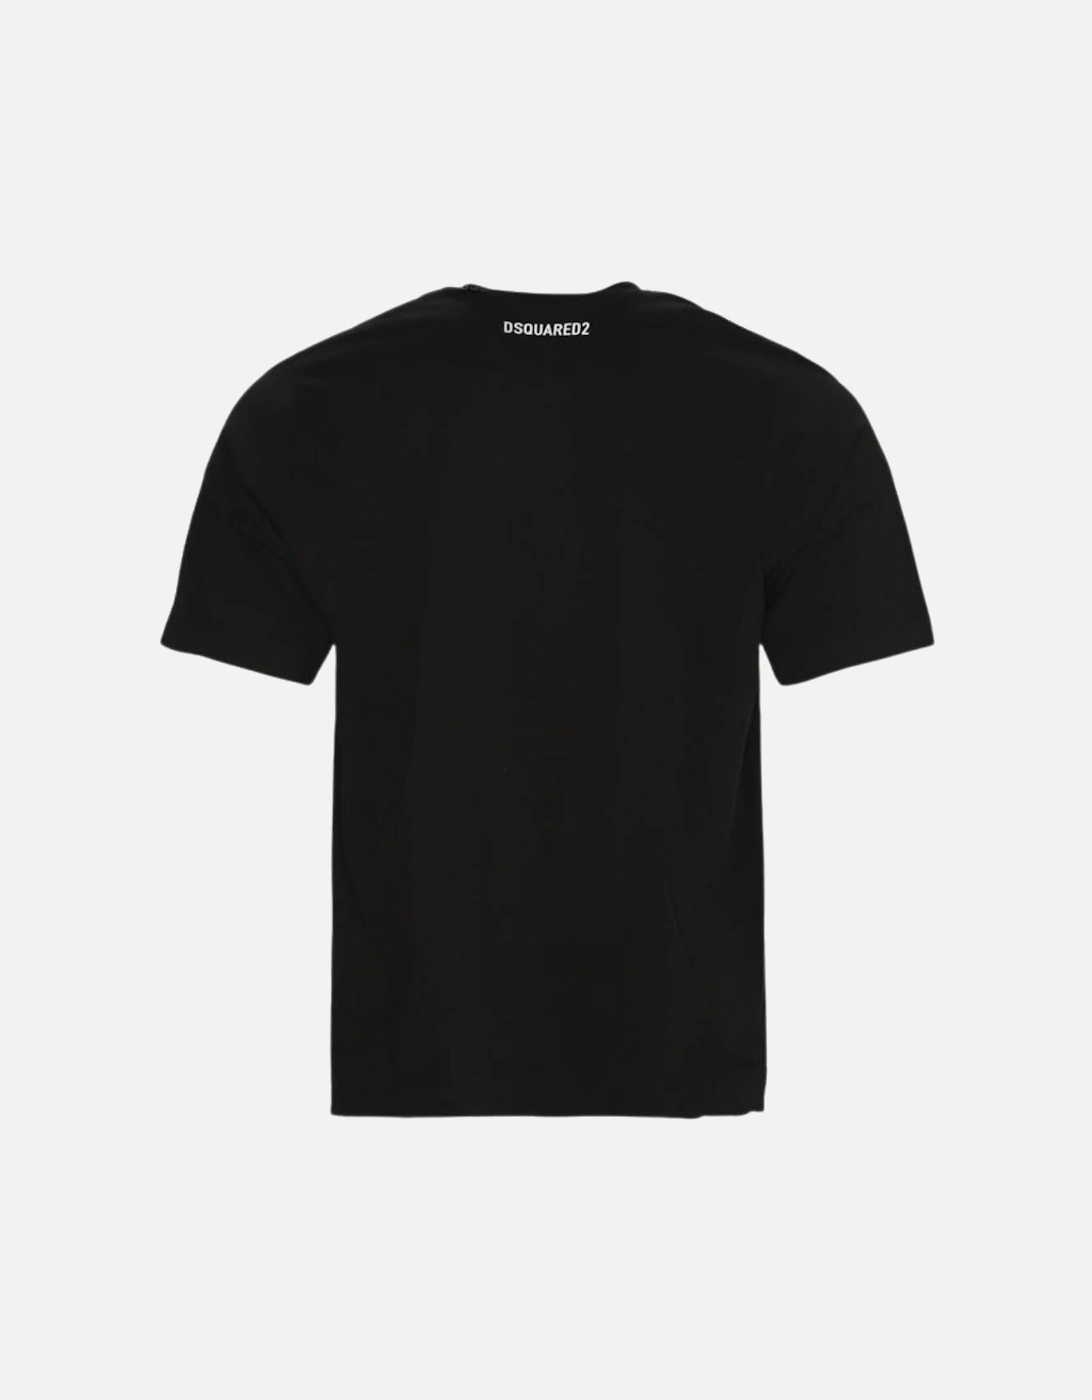 Made In Italy Since 1995 Oversize Black T-Shirt